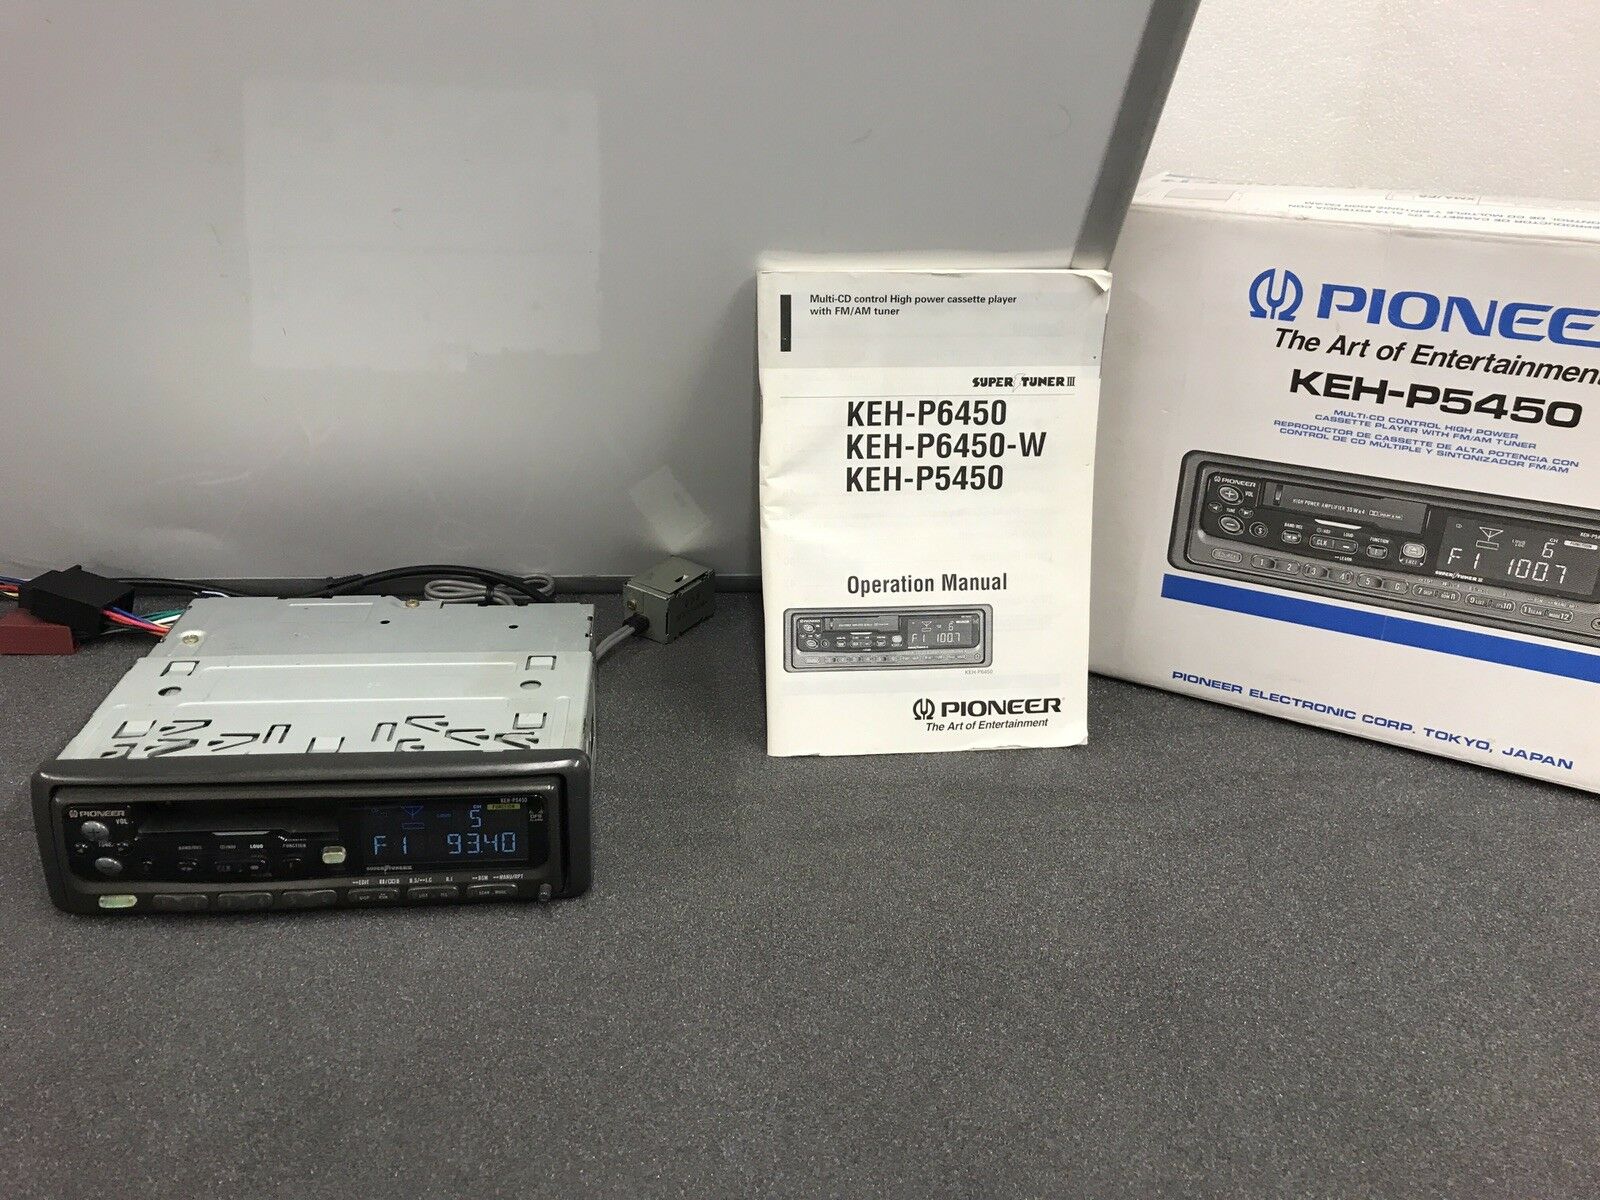 Pioneer Keh-P5450 Old Car Radio Stereo Cassette Player Cd Changer Control  Boxed